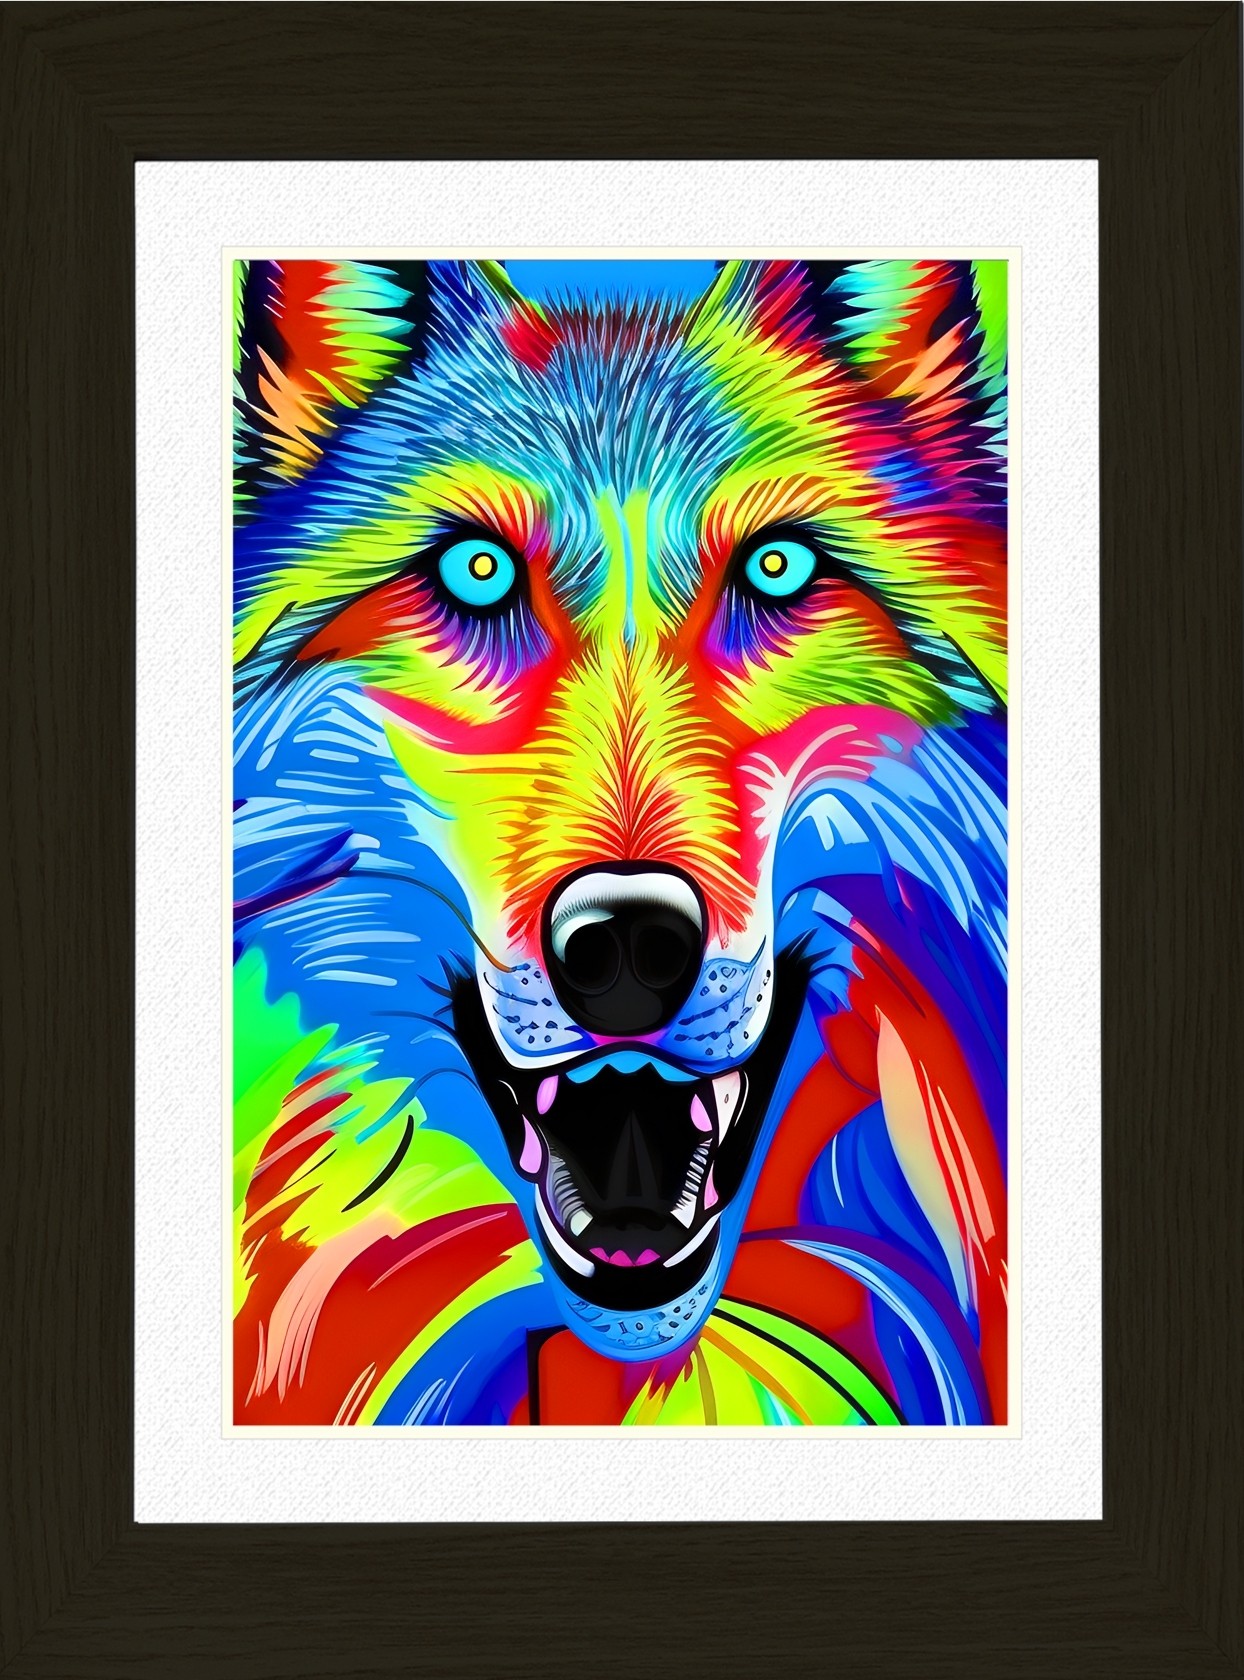 Wolf Animal Picture Framed Colourful Abstract Art (A4 Black Frame)